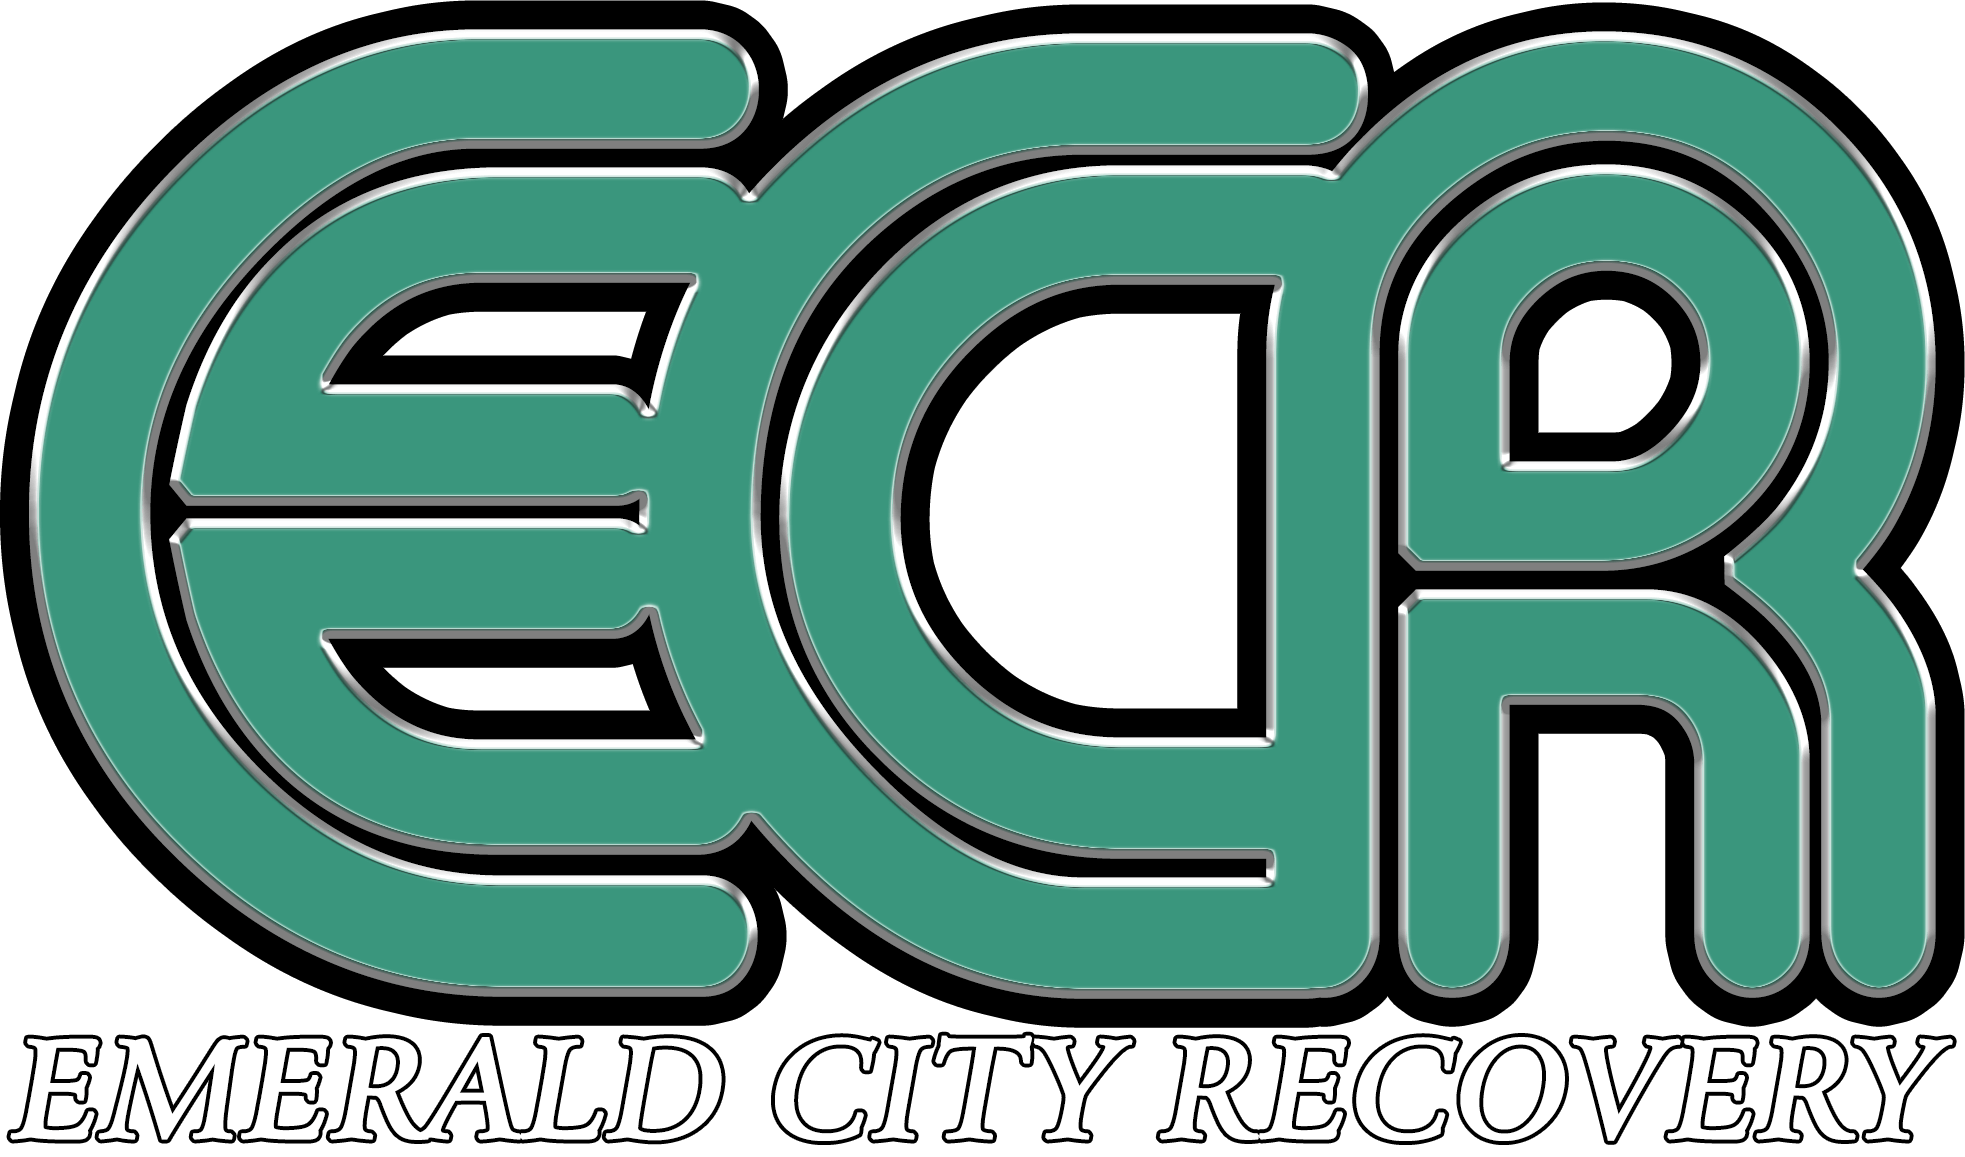 Emerald City Recovery provides professional voluntary recovery services in Washington state!